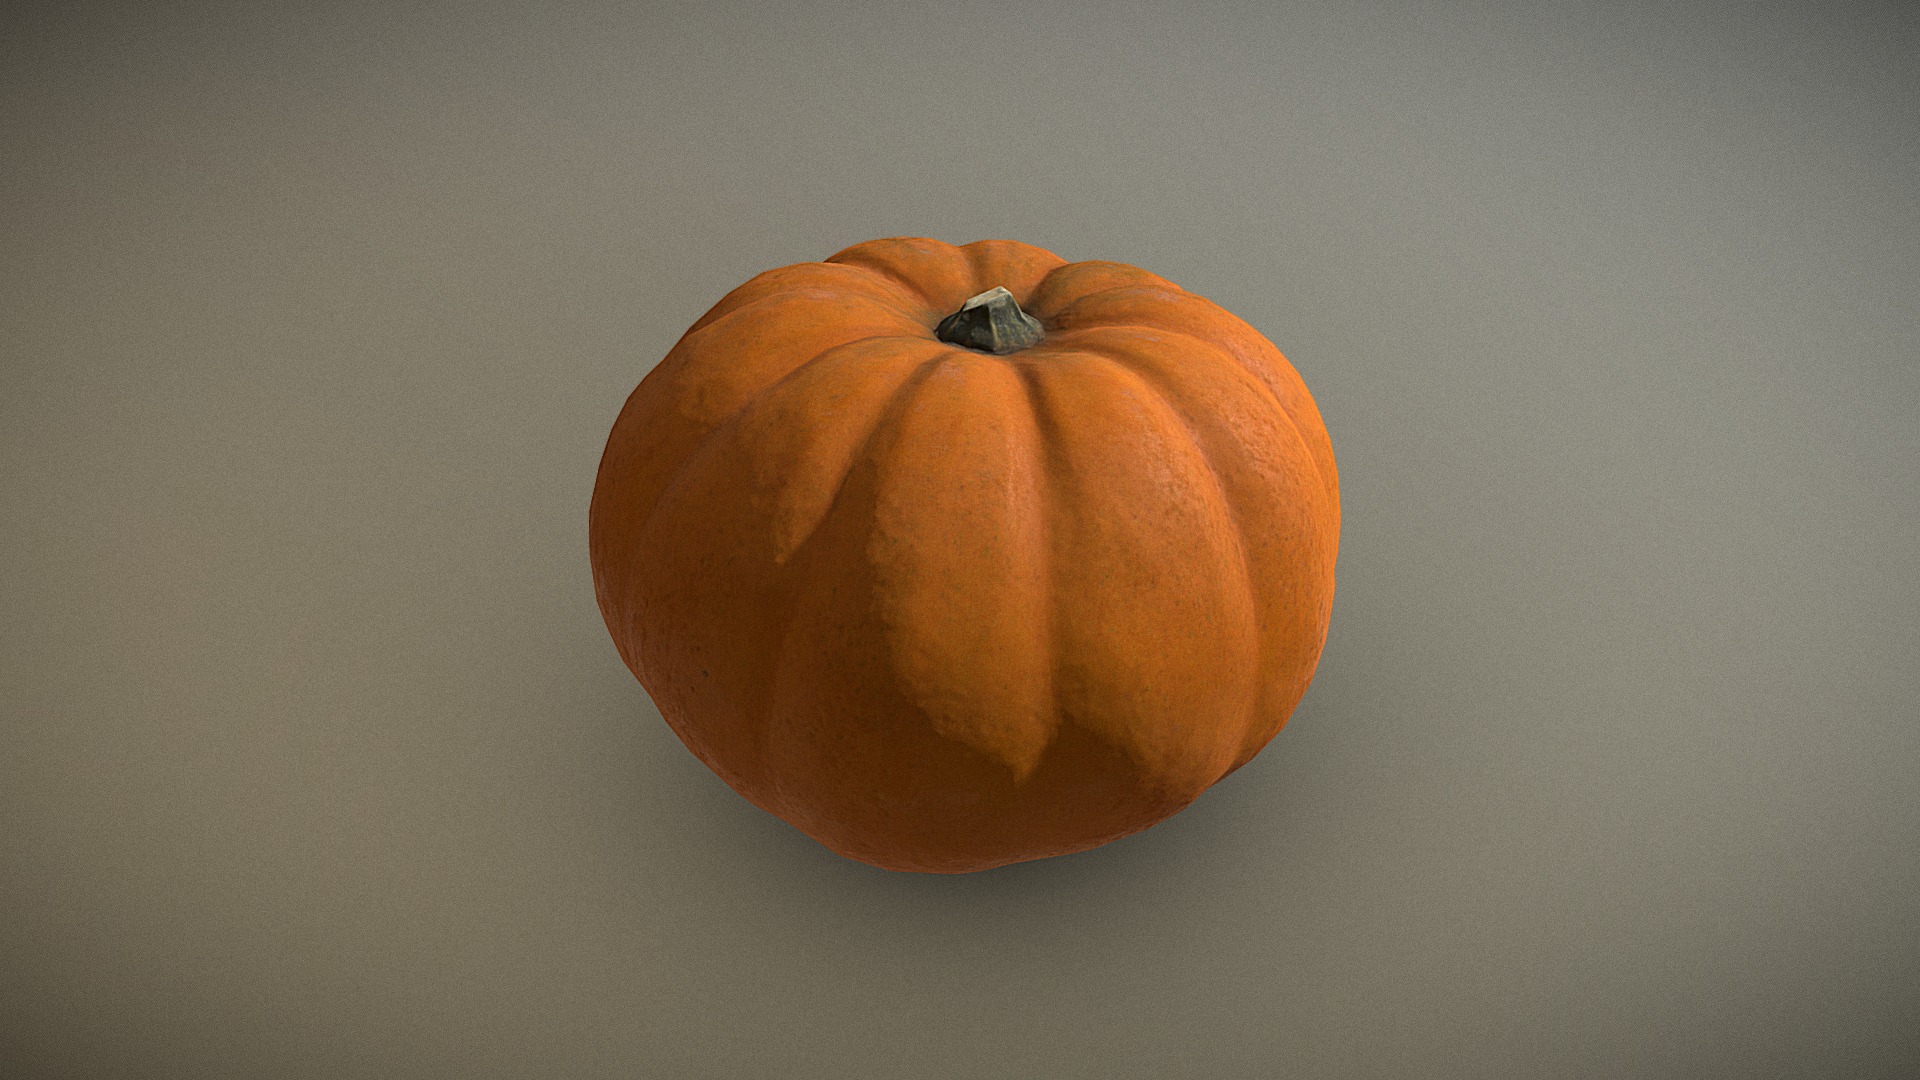 3D model Pumpkin - This is a 3D model of the Pumpkin. The 3D model is about a pumpkin with a face carved in it.